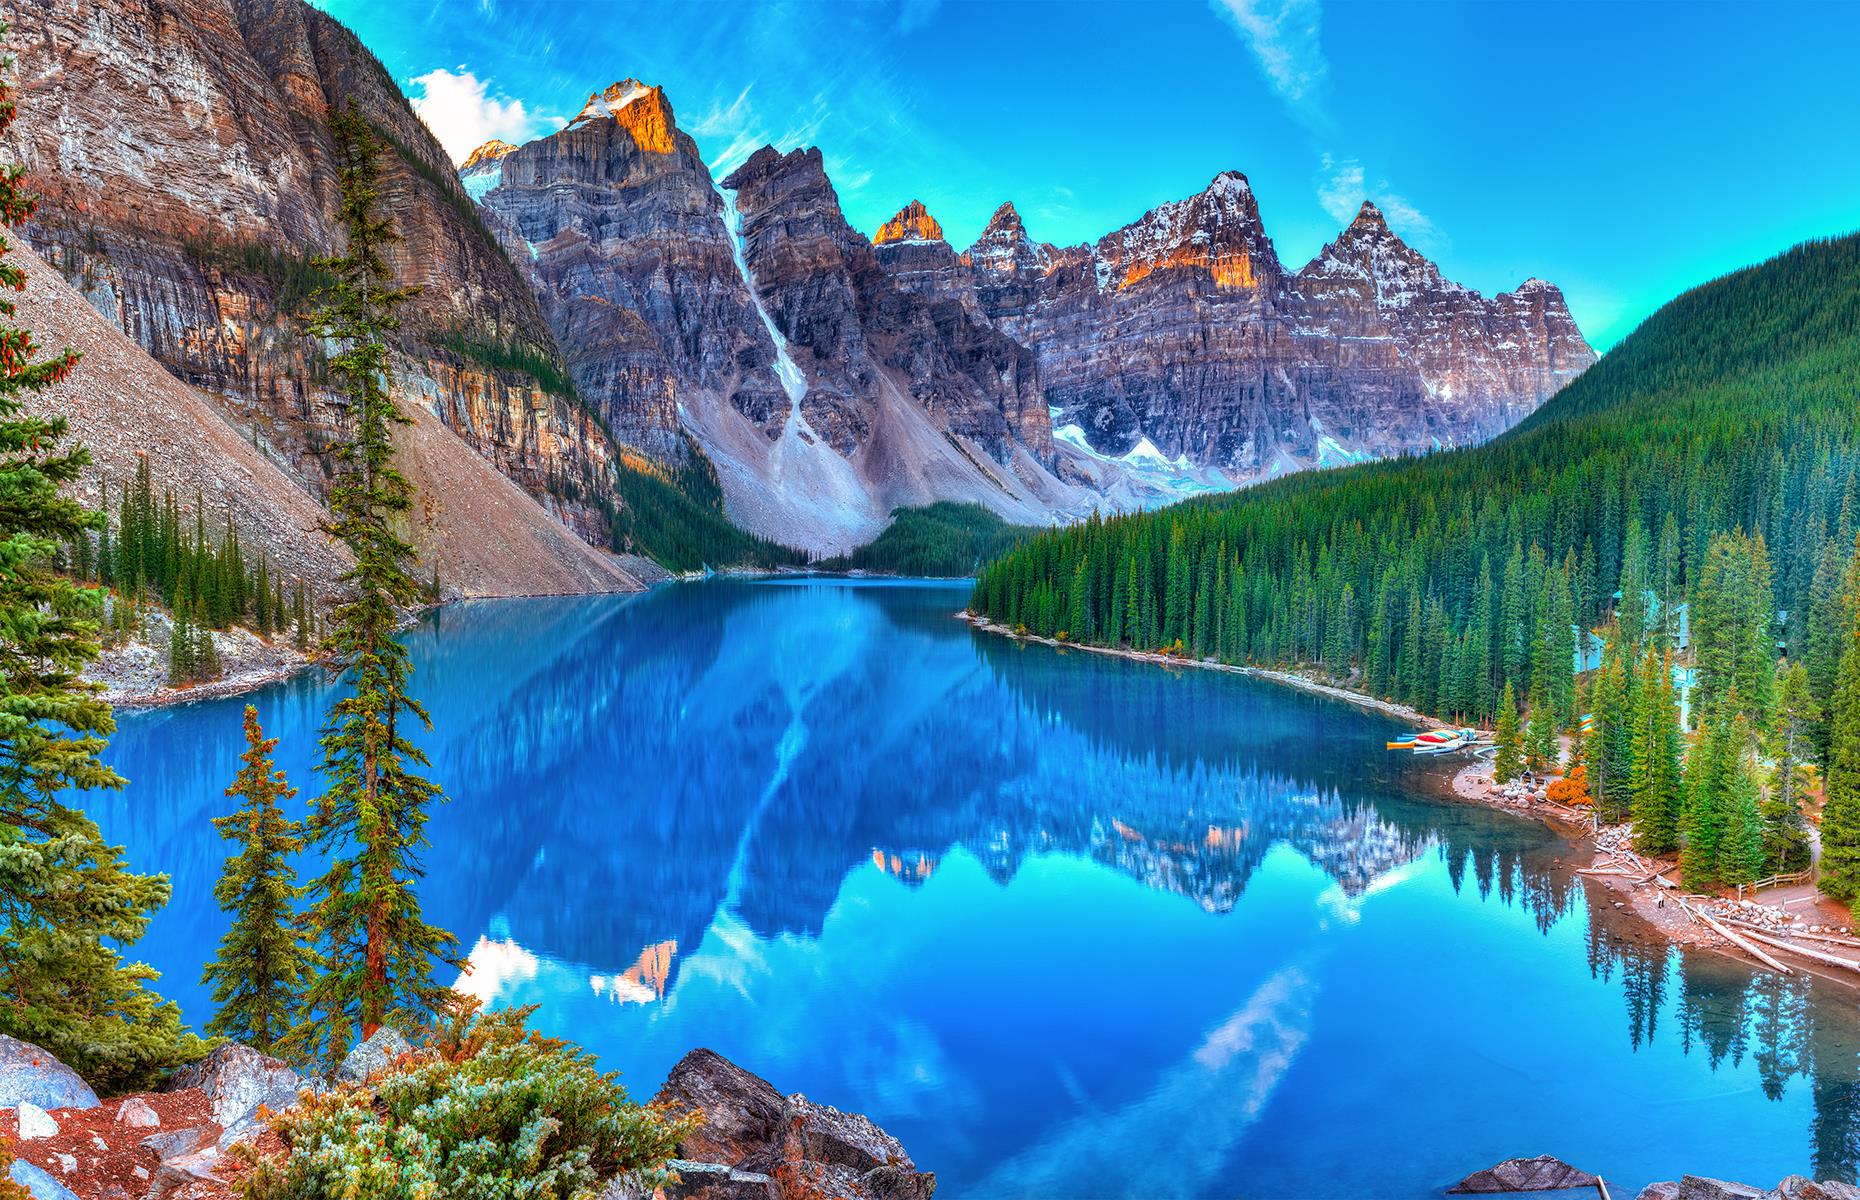 <p>Alberta's Banff National Park is chock-full of gorgeous lakes, from the park's most famous, Lake Louise, to the incredible turquoise expanses of Peyto Lake and Moraine Lake (pictured). Most lakes here get their distinctive blue color from the reflective glacial silt that makes its way into the water. Situated in the Valley of the Ten Peaks, the lake sits at an elevation of about 6,181 feet (1,884m) and has a surface area of 120 acres. Take a look at <a href="https://www.loveexploring.com/galleries/93757/stunning-images-of-canadas-jaw-dropping-natural-wonders?page=1">stunning images of Canada's jaw-dropping natural wonders</a>.</p>